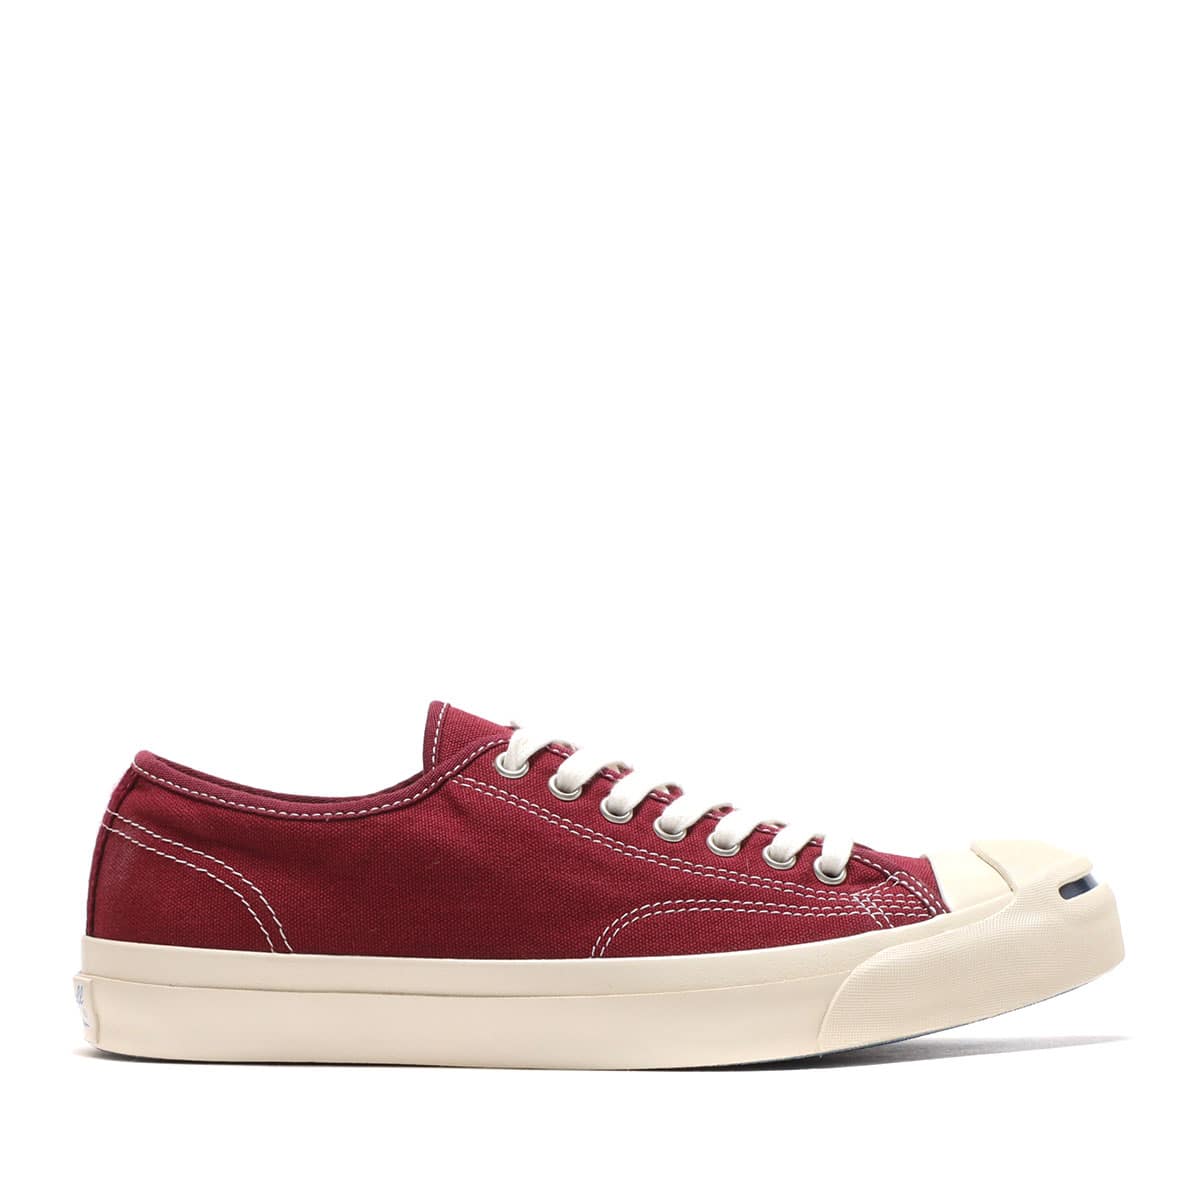 CONVERSE JACK PURCELL US COLORS BURGUNDY 22FW-I